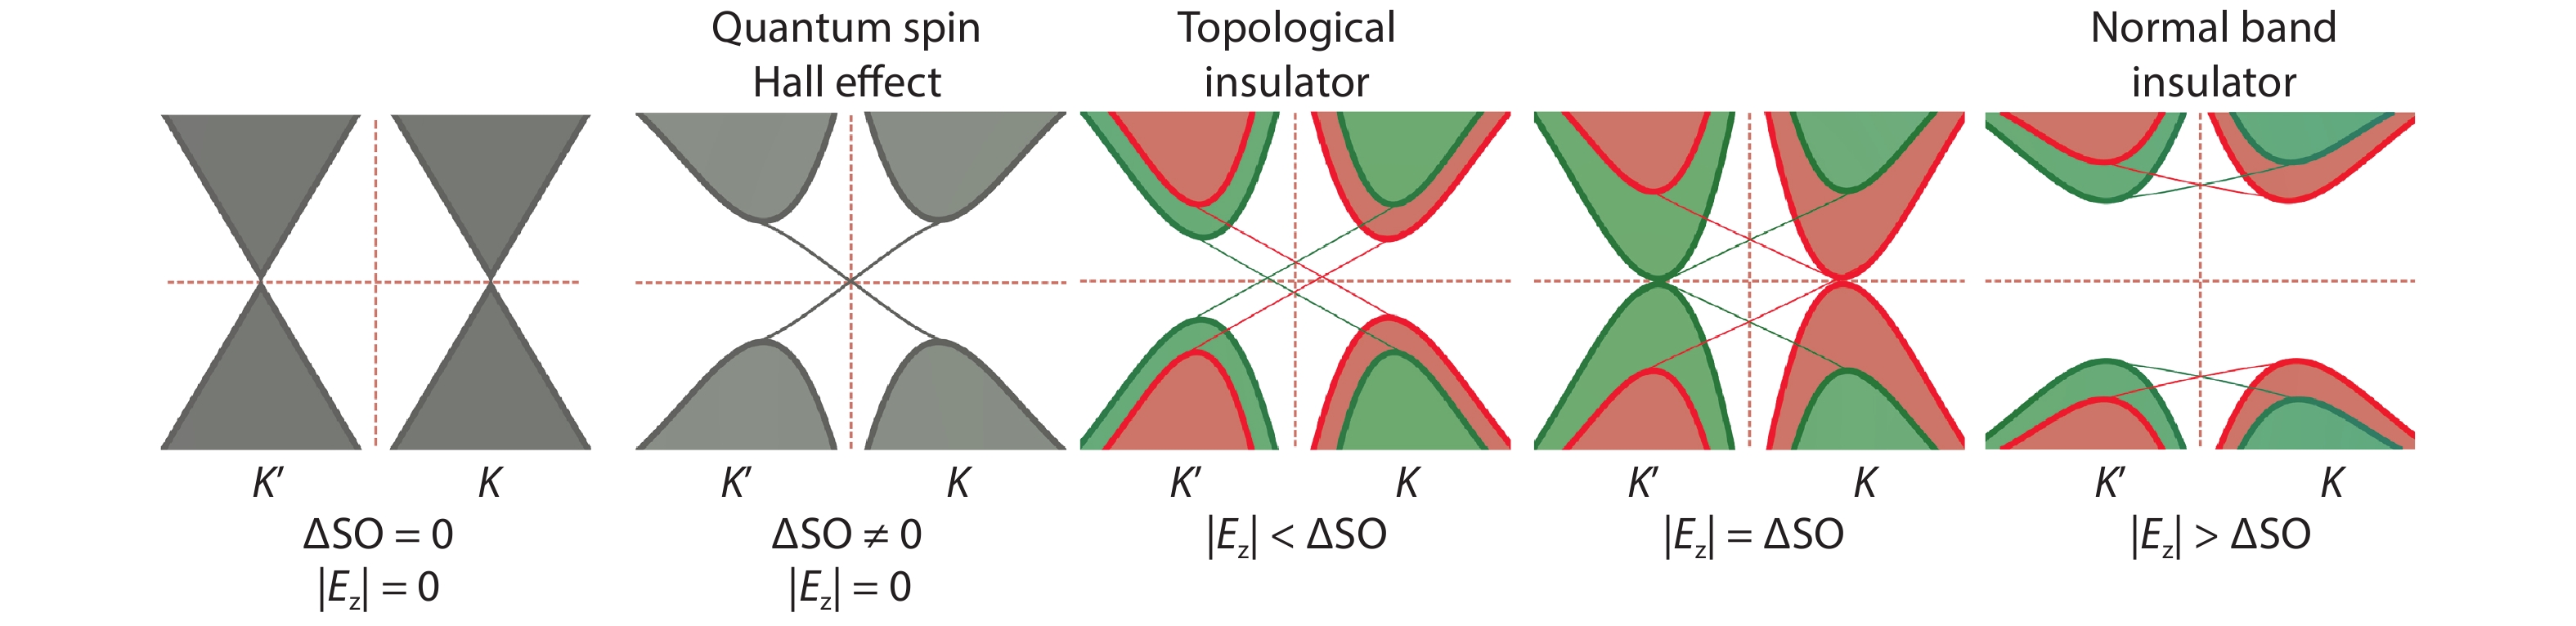 (Color online) Schematic diagram of the band structure of germanene near the K and K’ points of the surface Brillouin zone. From left to right: band structure without a spin-orbit gap, with a spin-orbit gap, applied electric field smaller than the critical value, applied electric field equal to the critical value and applied electric field larger than the critical value. Red and green refer to spin up and spin down bands, respectively.